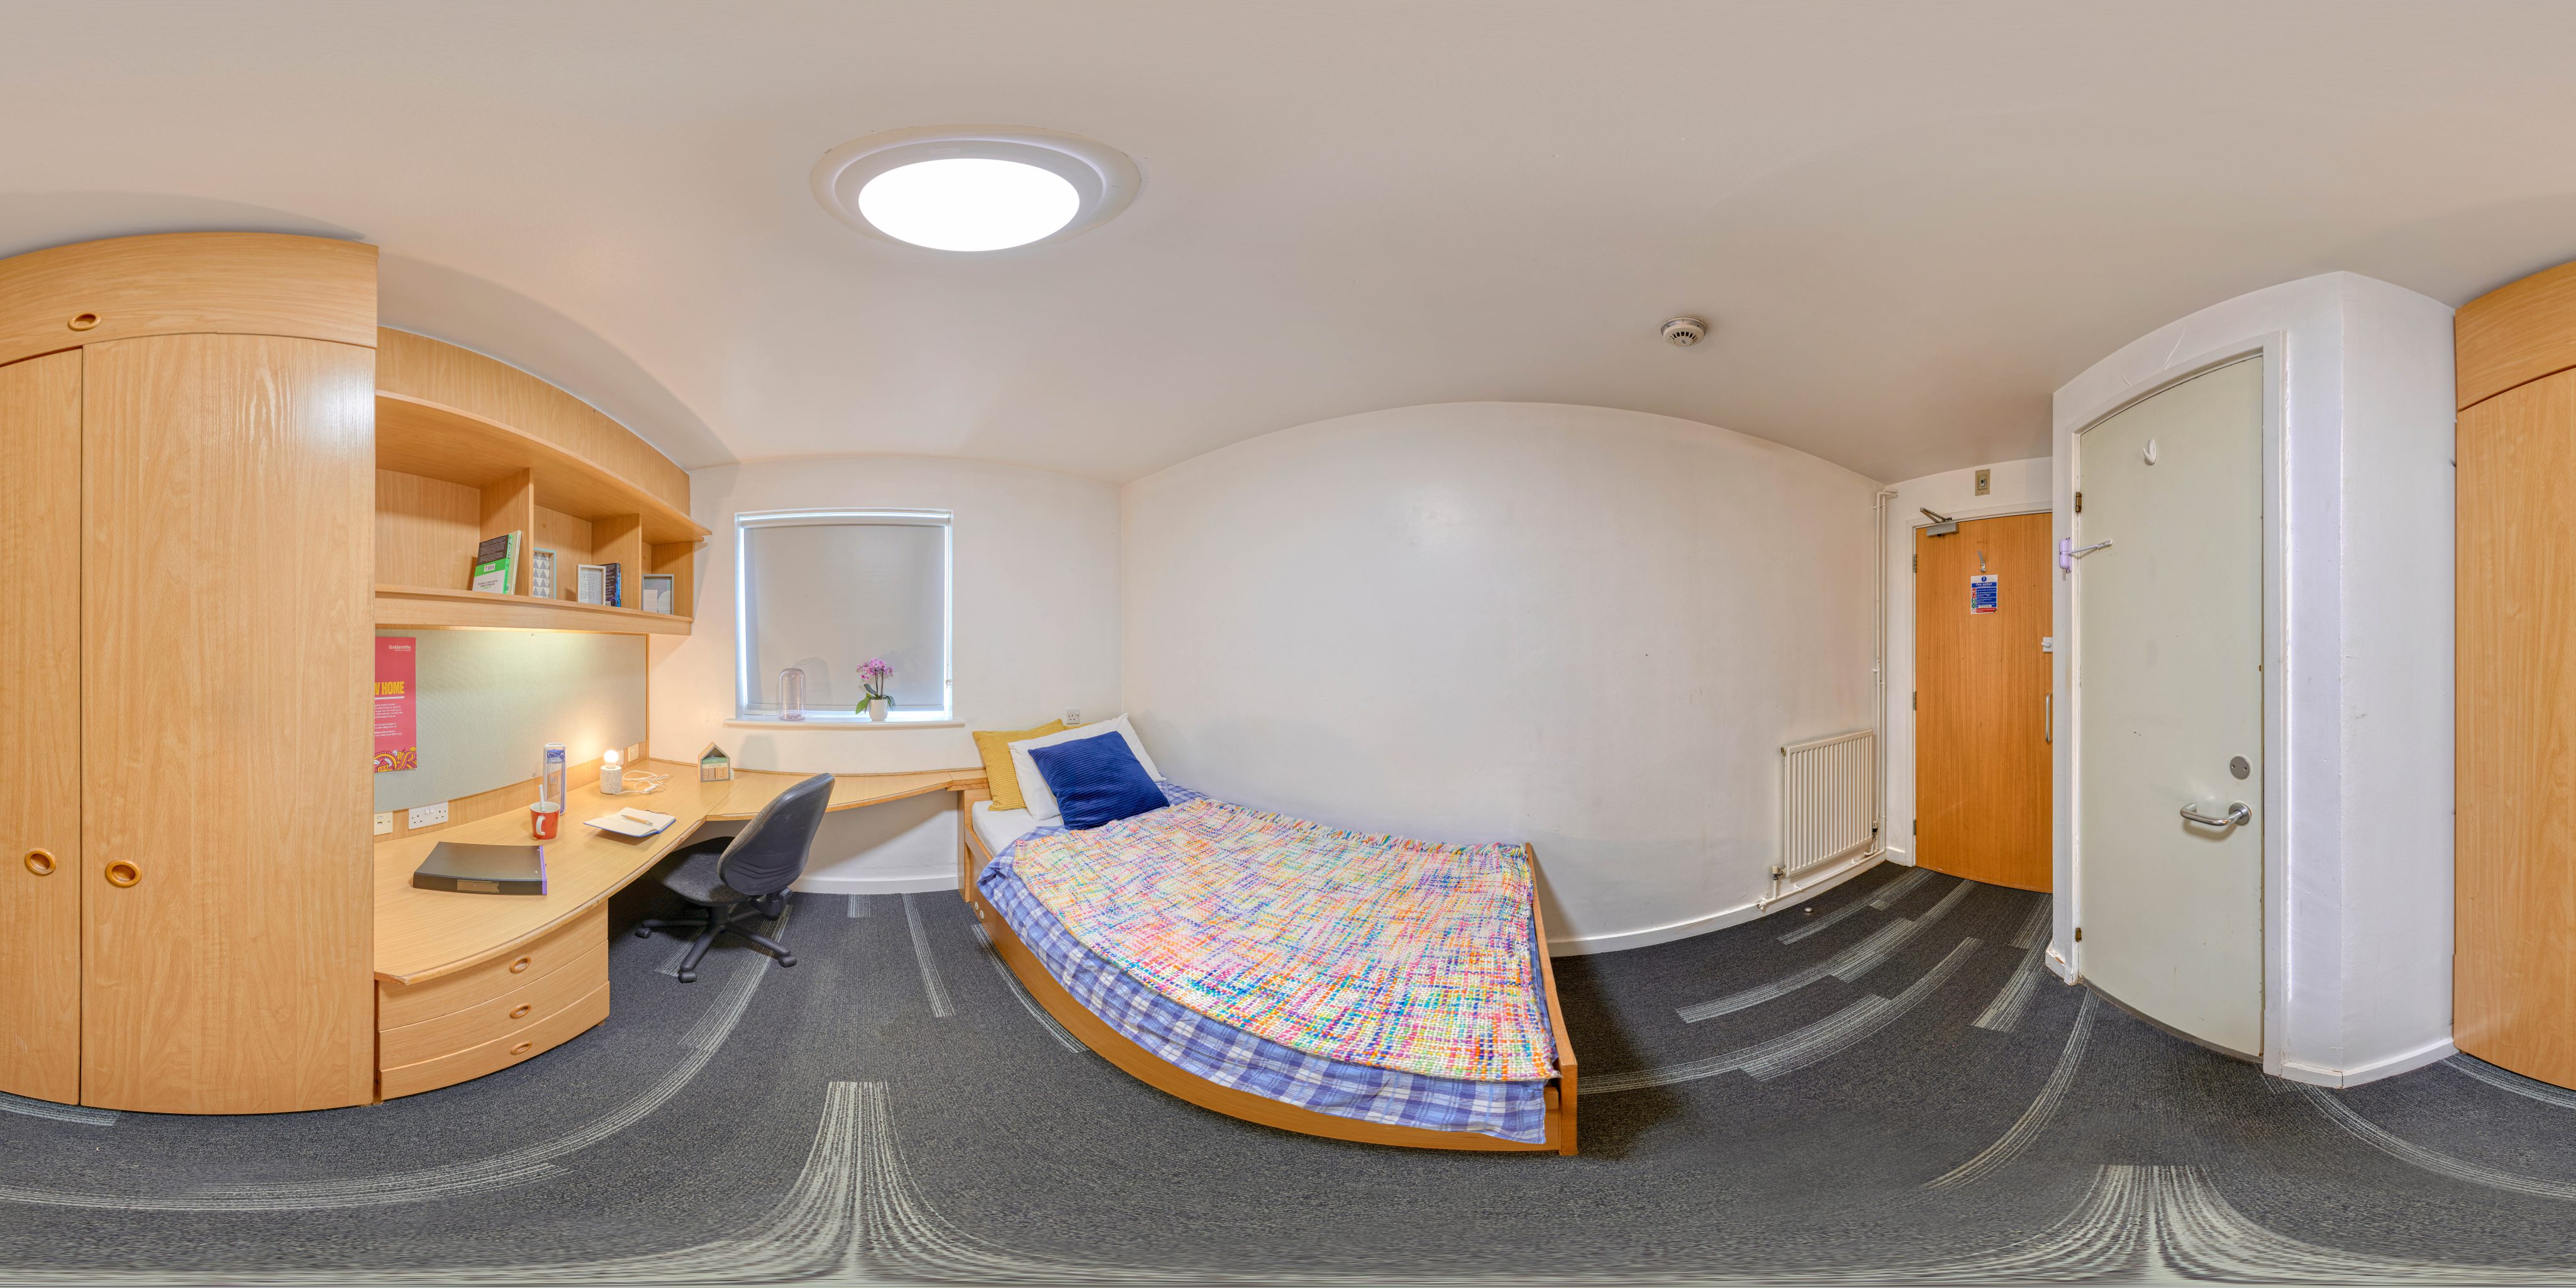 A 360 degree image of a bedroom in Loring Hall